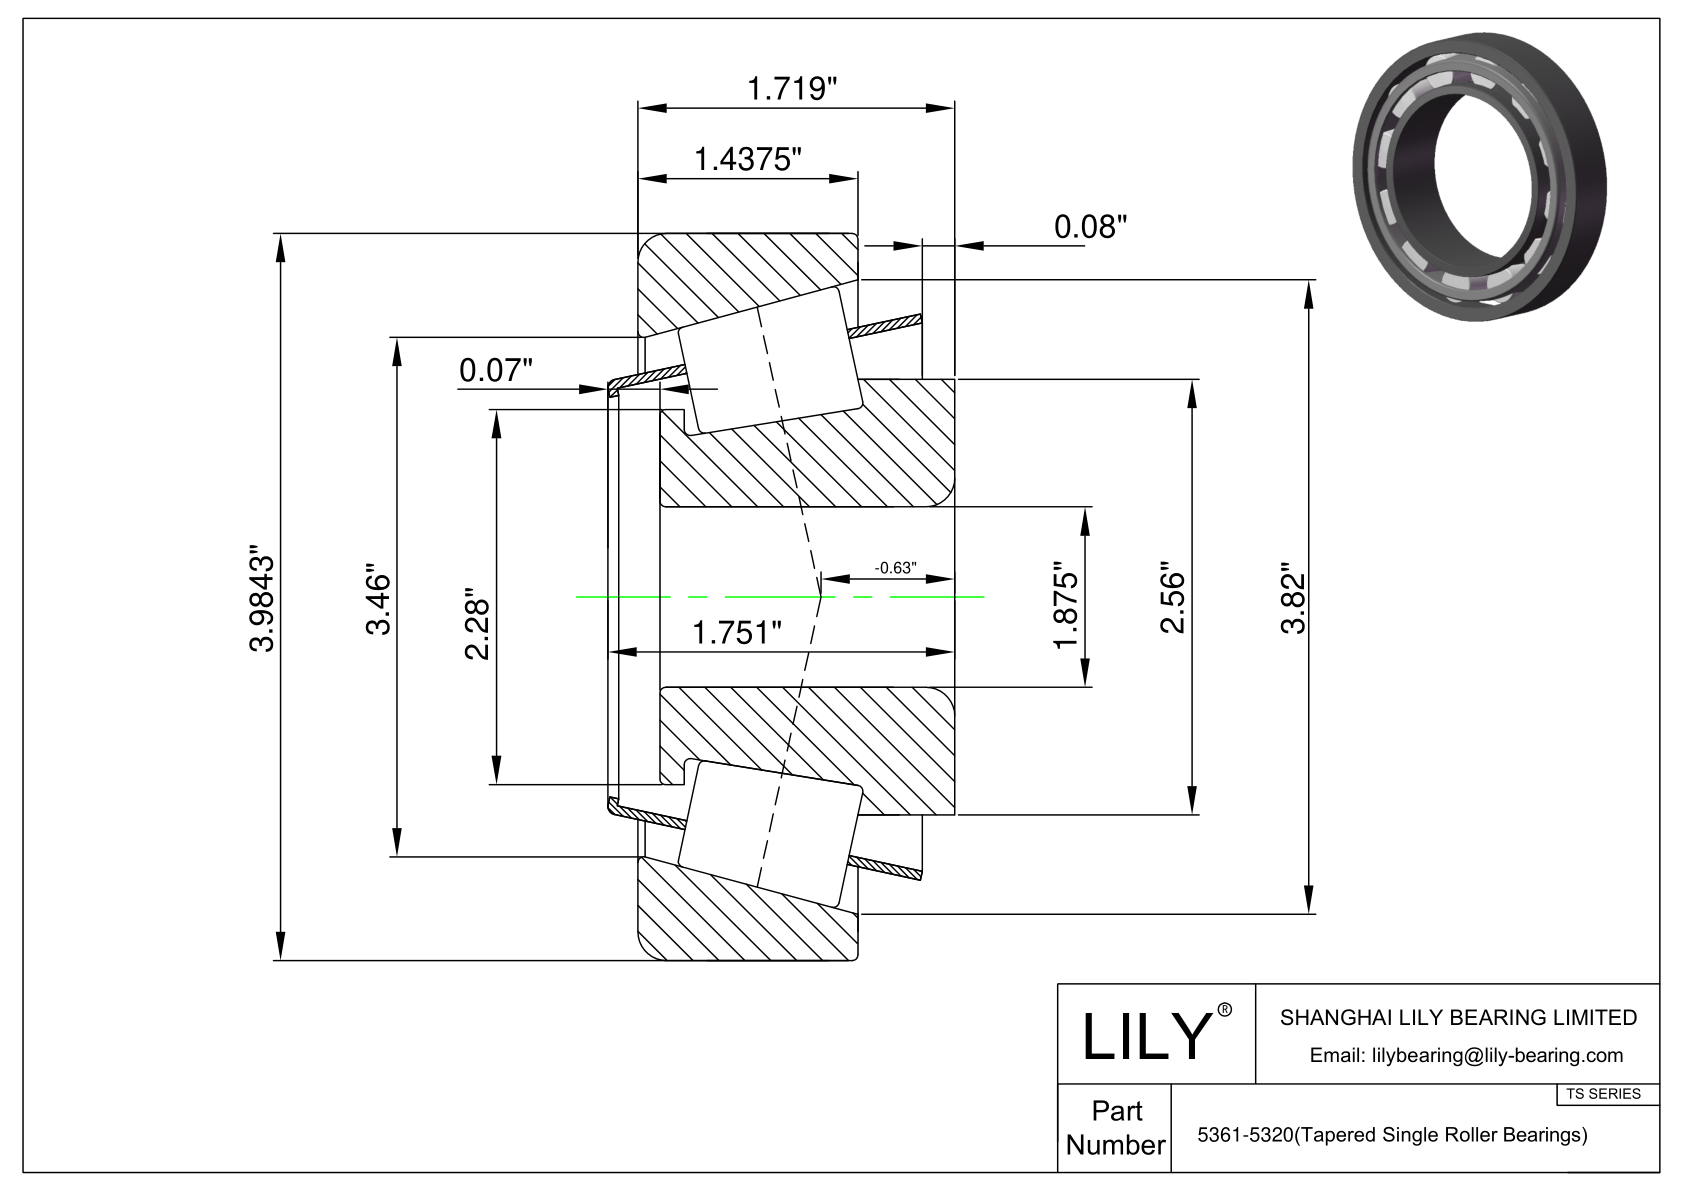 5361-5320 TS (Tapered Single Roller Bearings) (Imperial) cad drawing